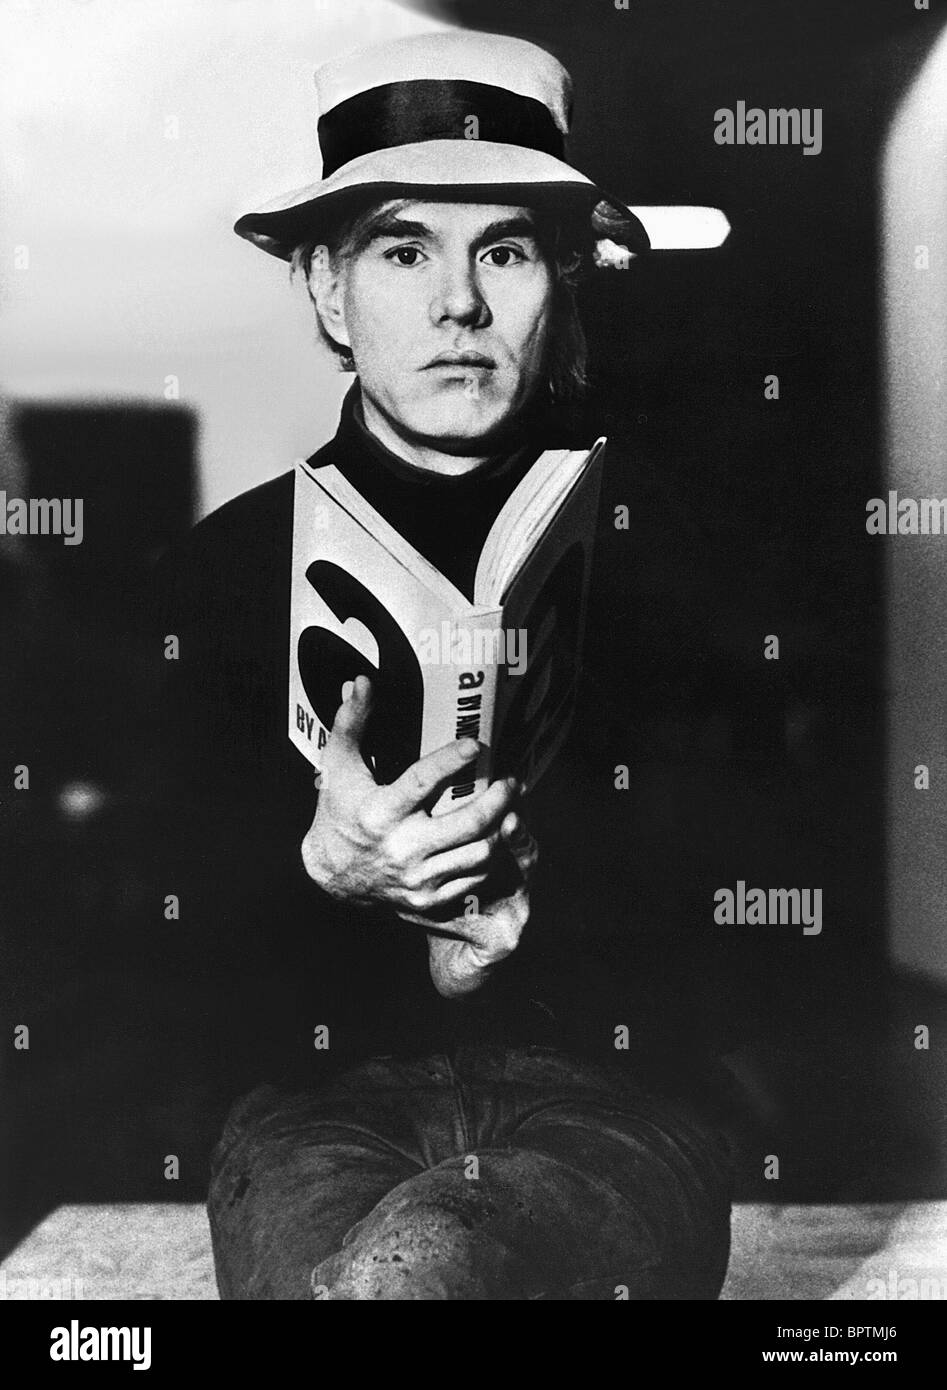 ANDY WARHOL ACTOR DIRECTOR PRODUCER WRITER (1965) Stock Photo